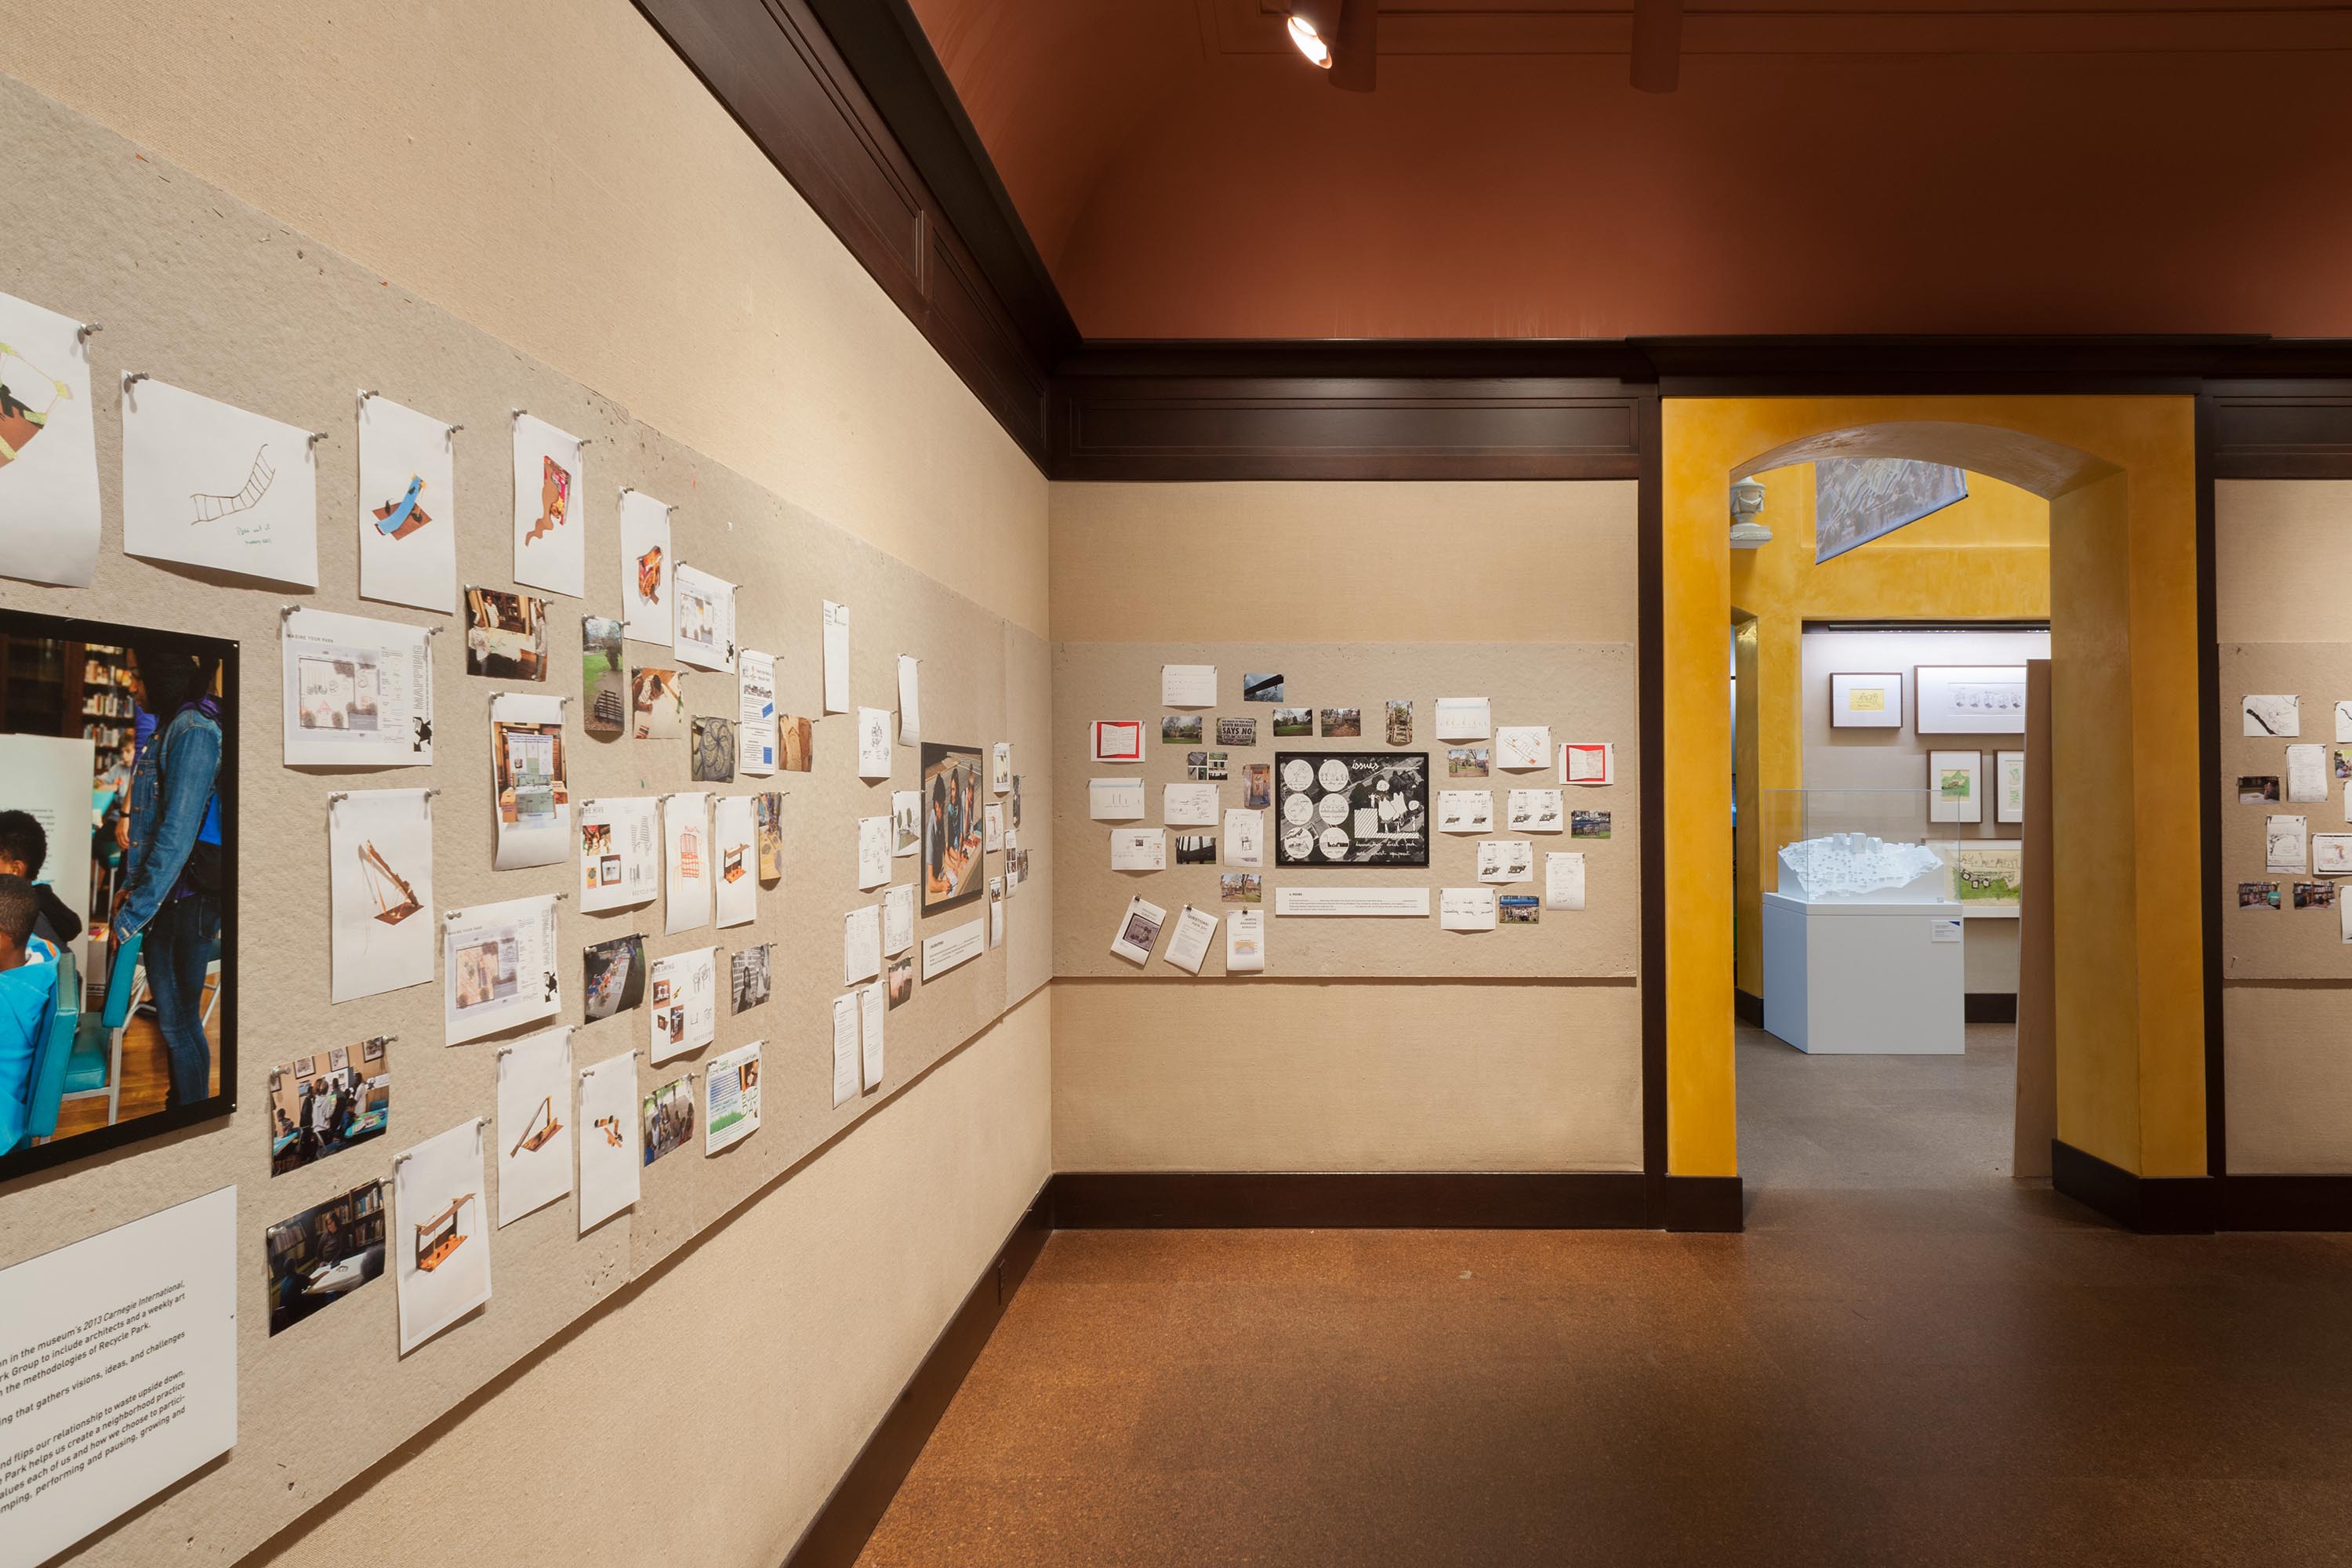 Installation view, “Building Optimism: Public Space in South America” at Carnegie Museum of Art, Photo: Bryan Conley